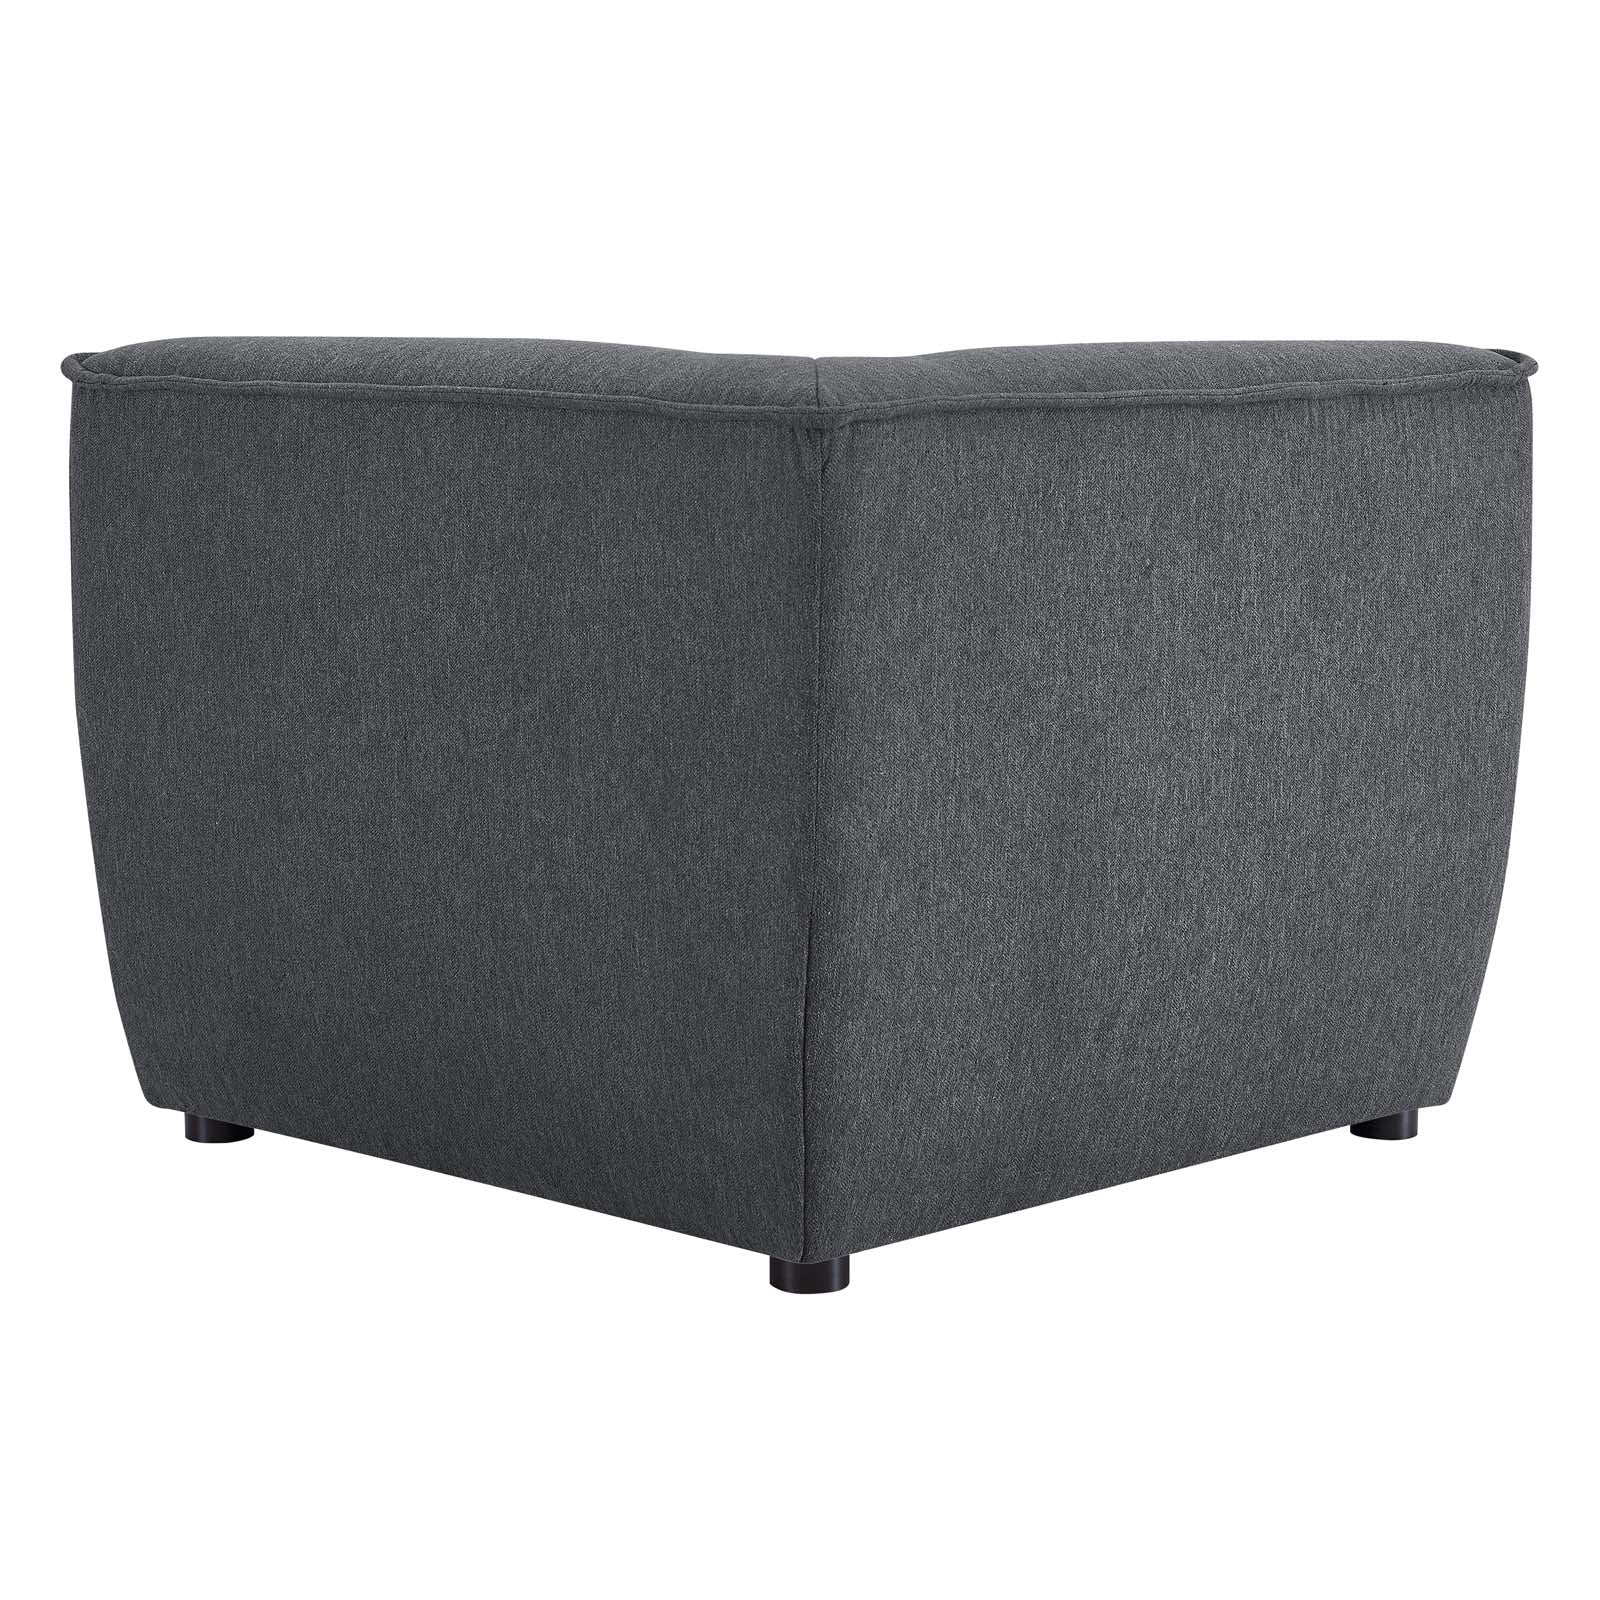 Modway Accent Chairs - Comprise Corner Sectional Sofa Chair Charcoal